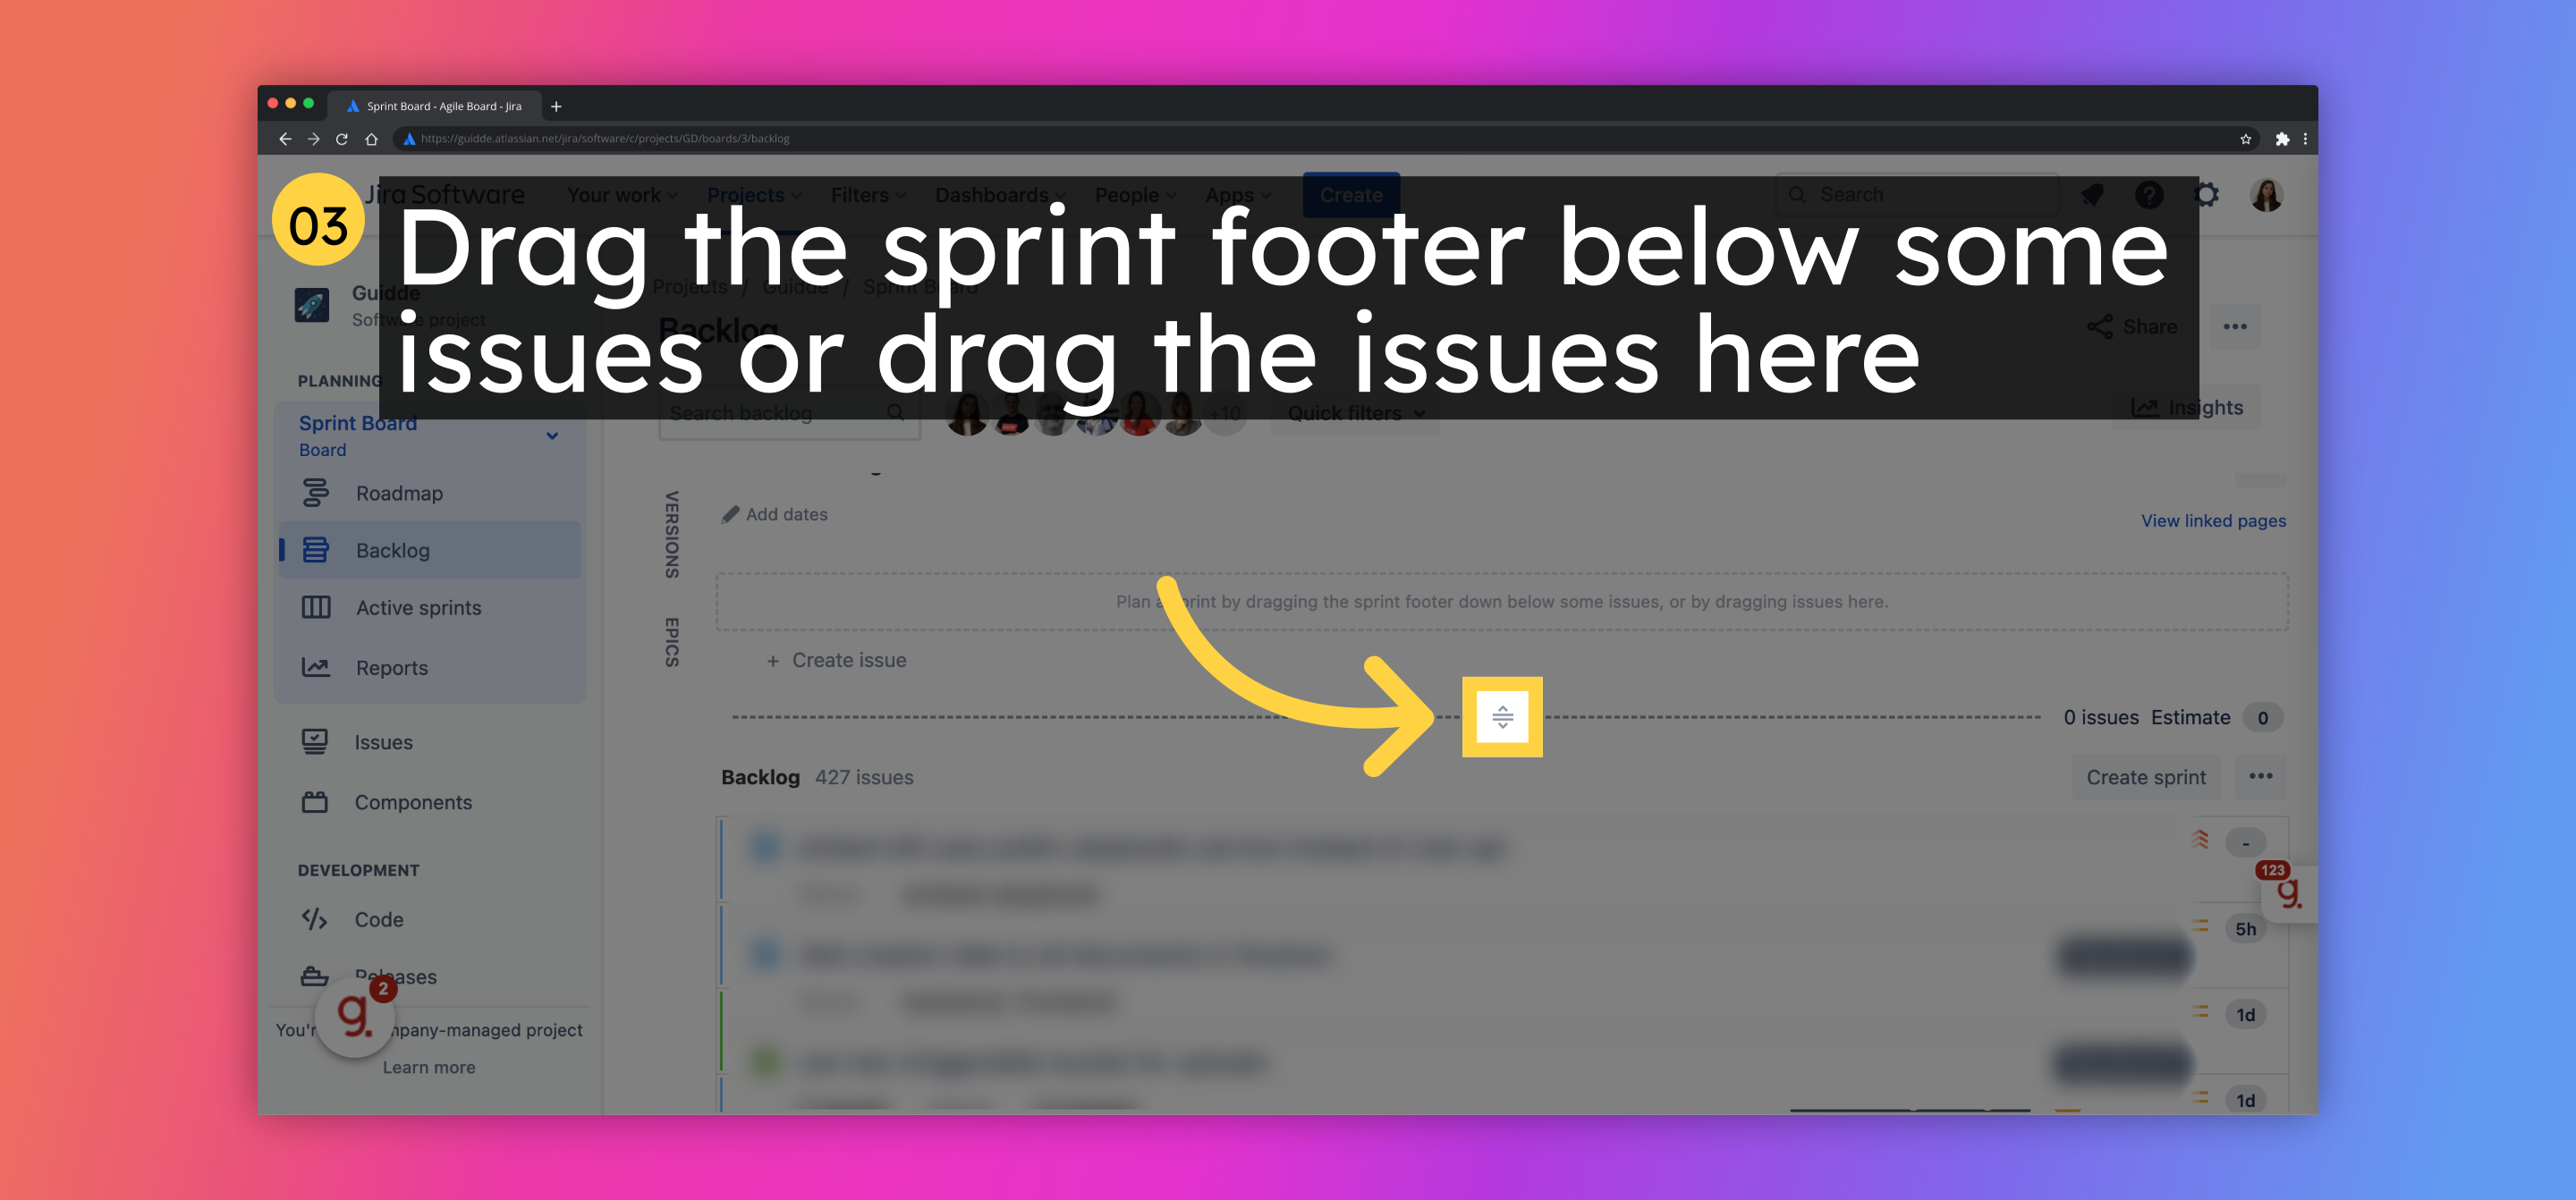 Drag the sprint footer below some issues or drag the issues here